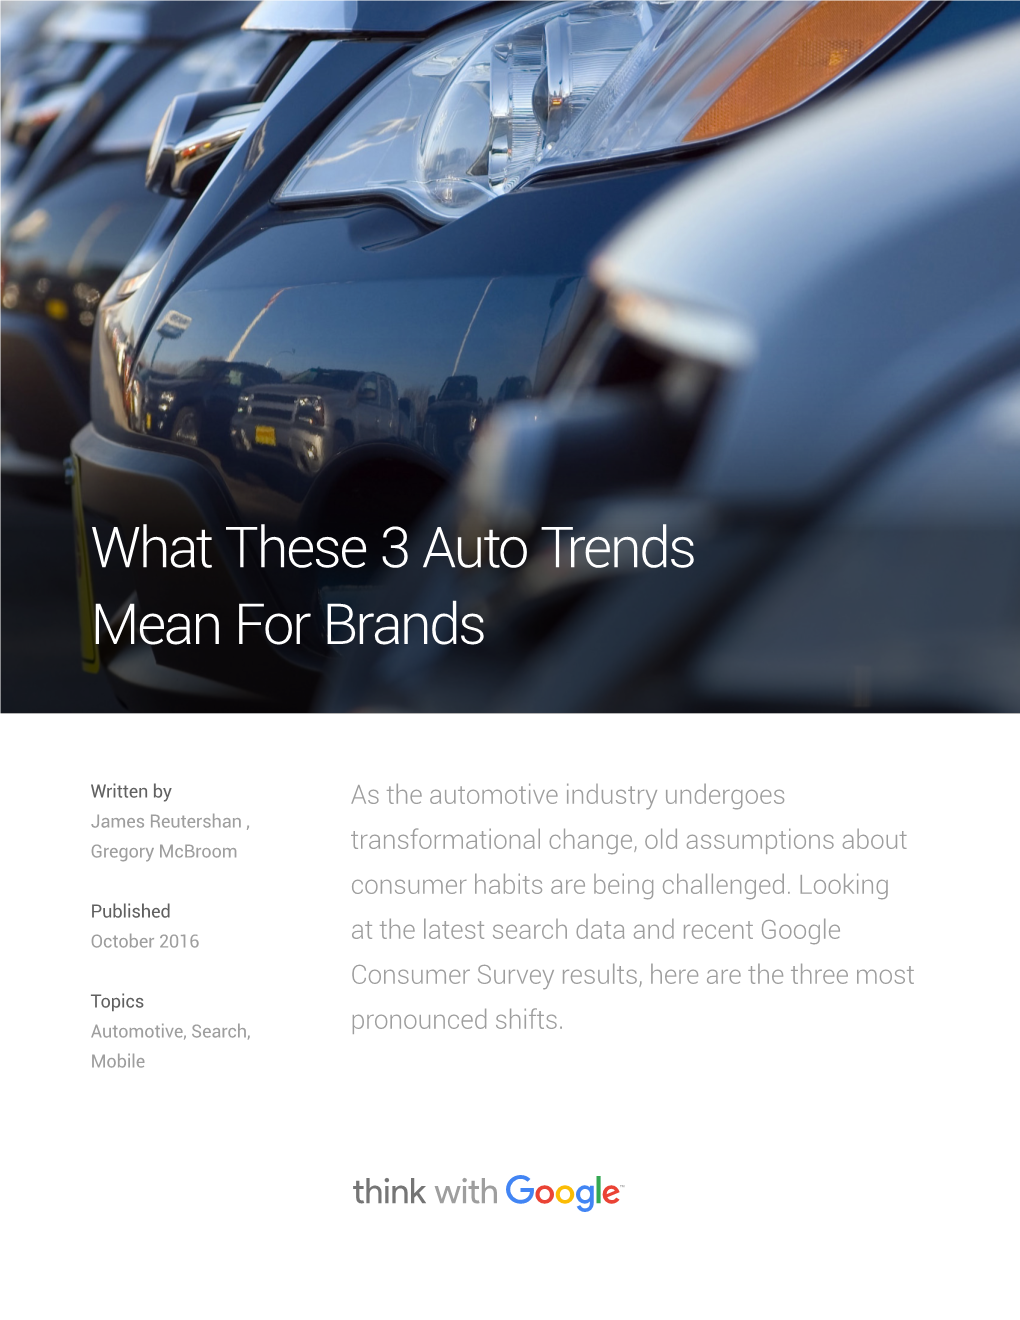 What These 3 Auto Trends Mean for Brands